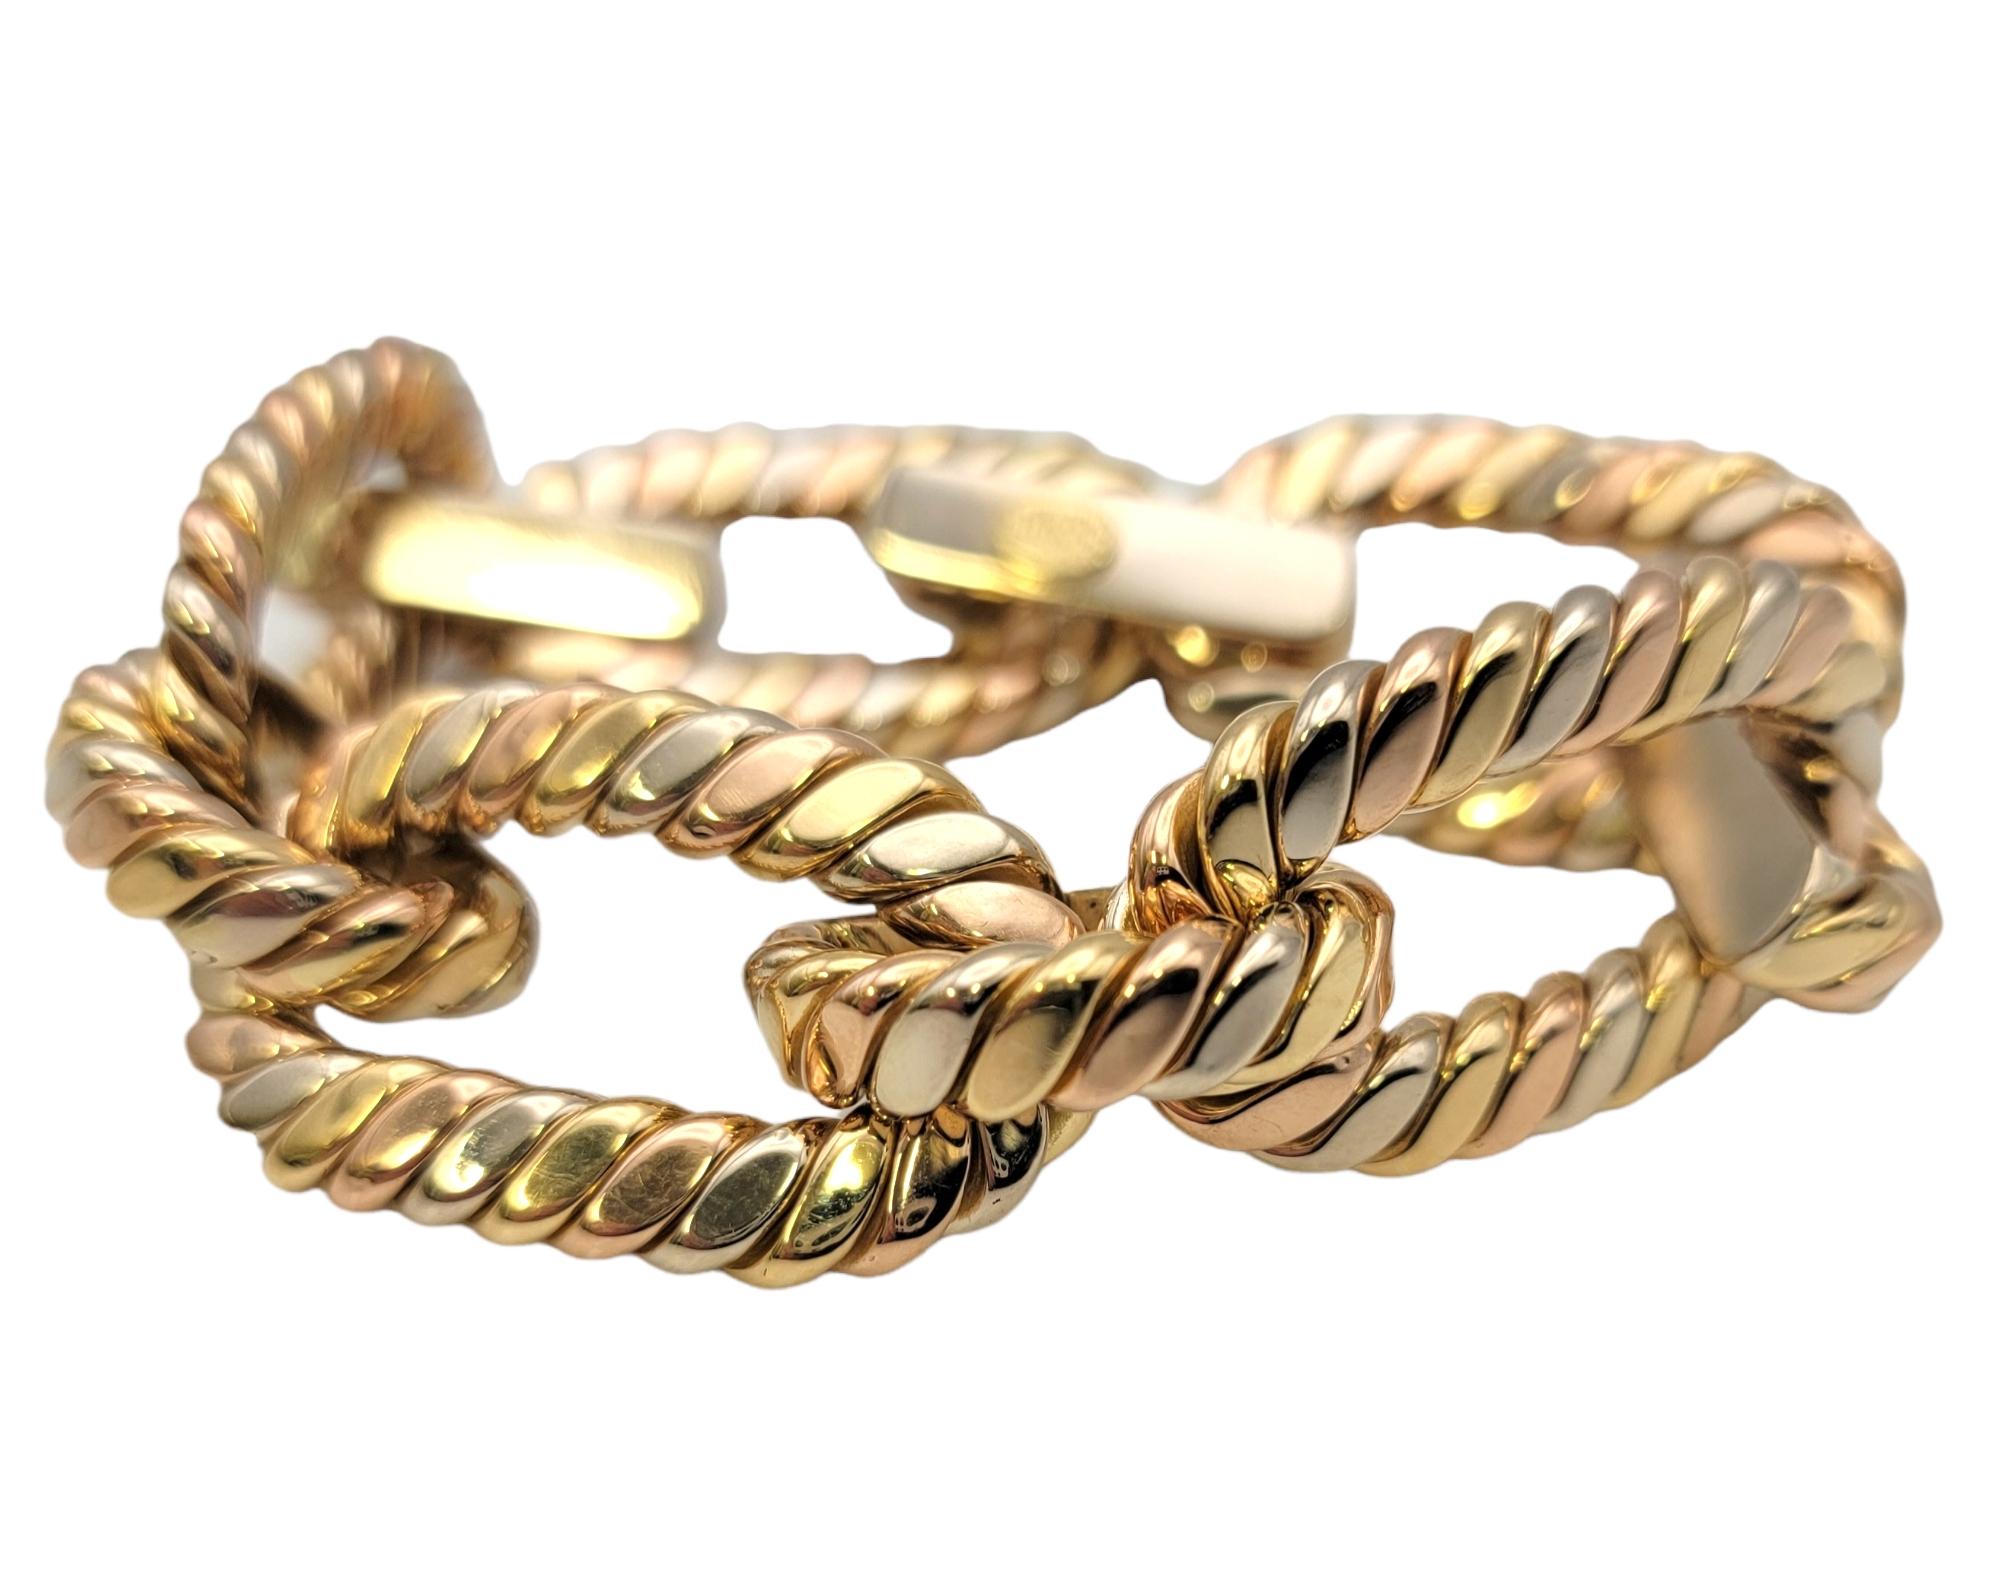 Incredible tri-tone gold designer link bracelet by Chimento in a chunky, oversized style. This bracelet was built to make a statement! Featuring 5 extra large oval-shaped links in a contrasting yellow, rose and white gold design with a twisted cable